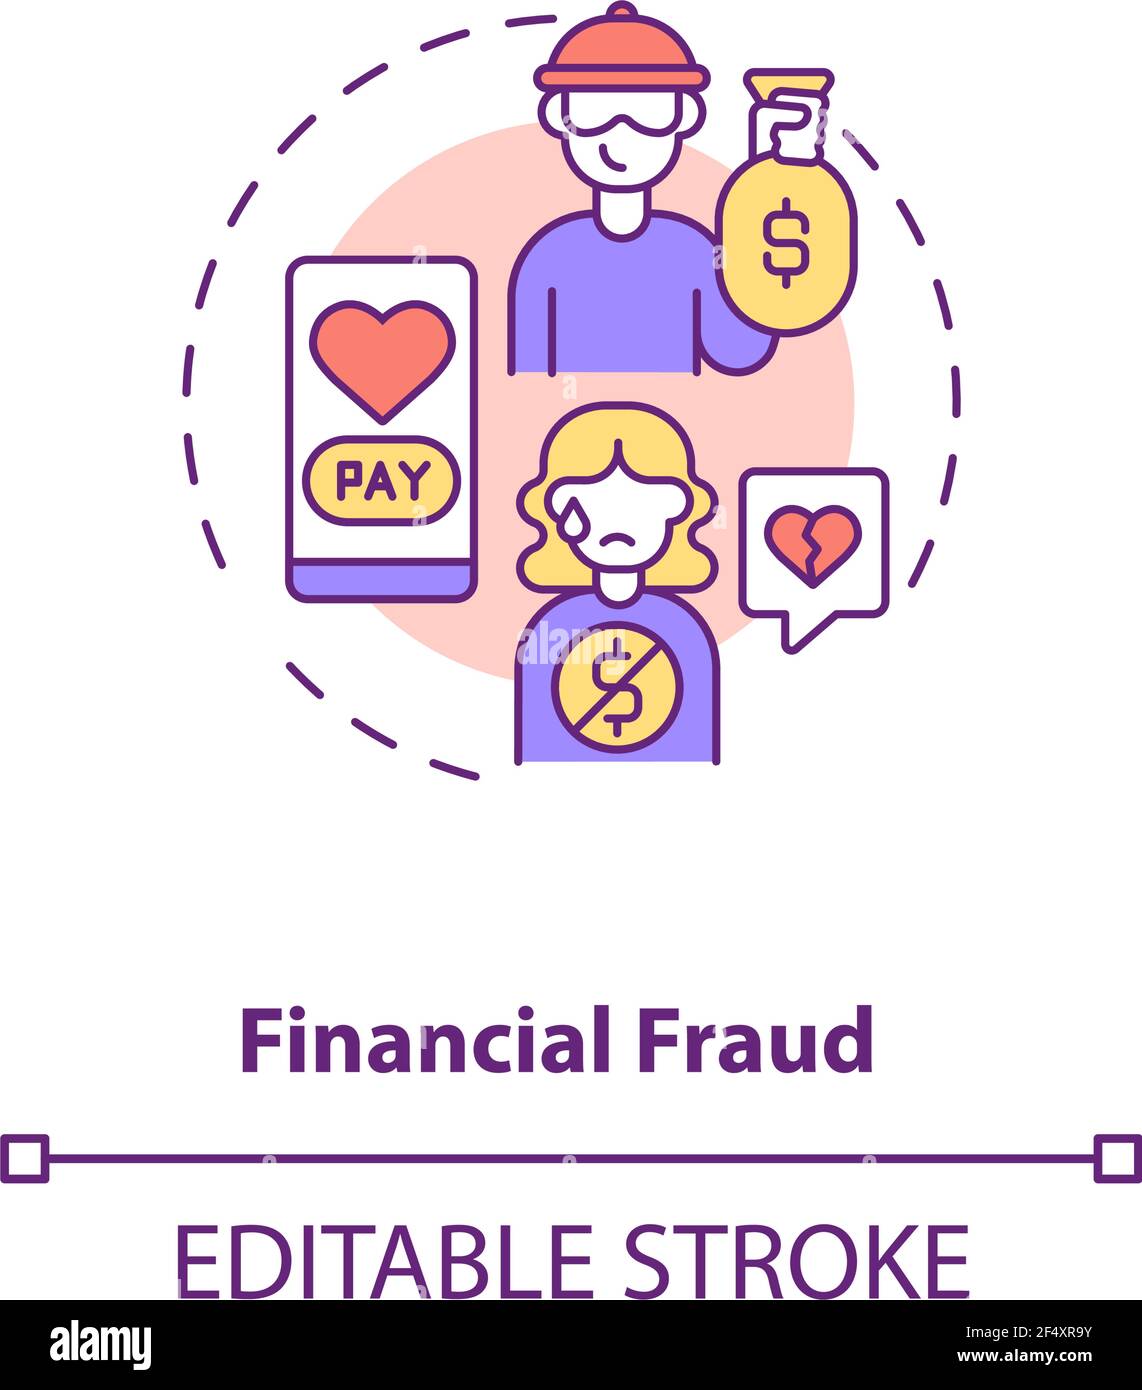 Financial fraud on dating website concept icon. Stock Vector